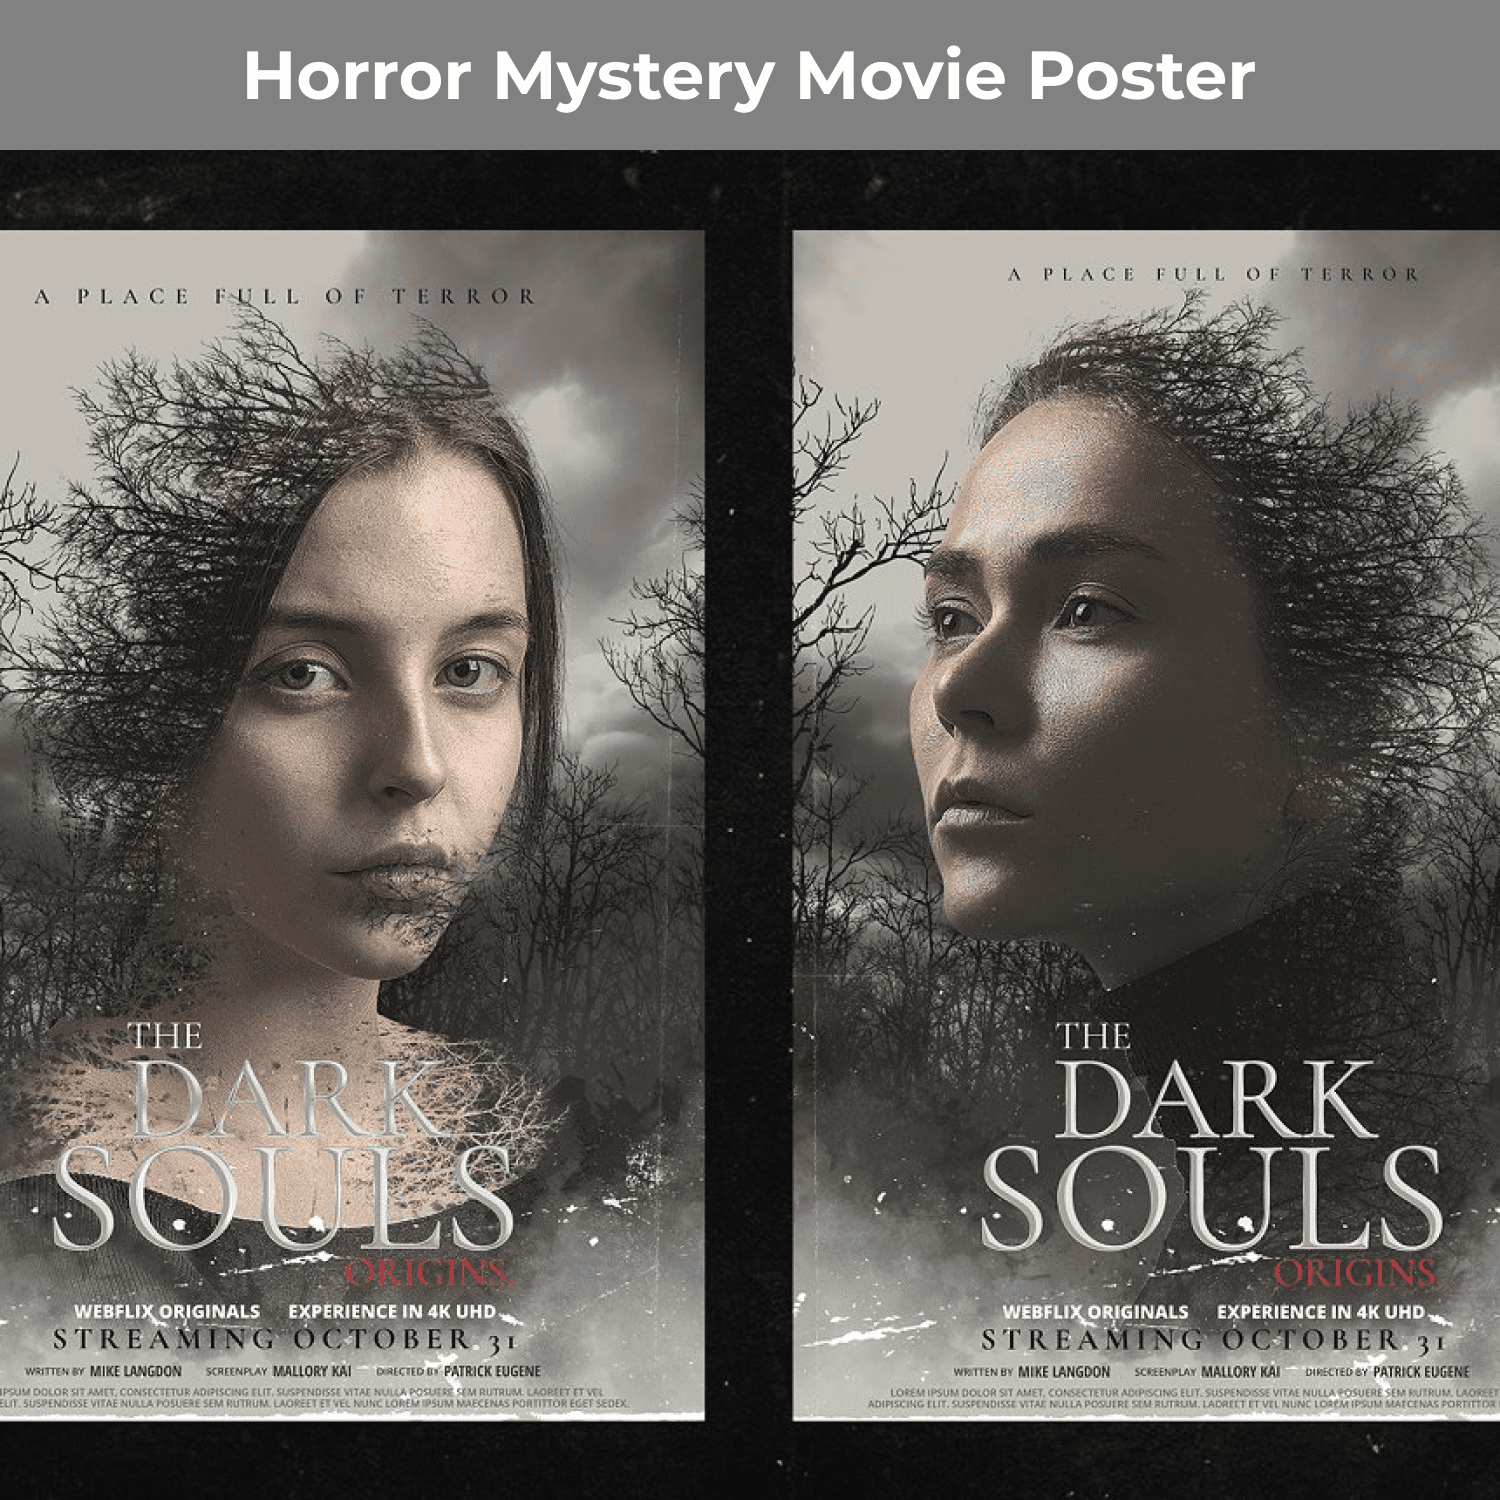 Horror Mystery Movie Poster cover image.